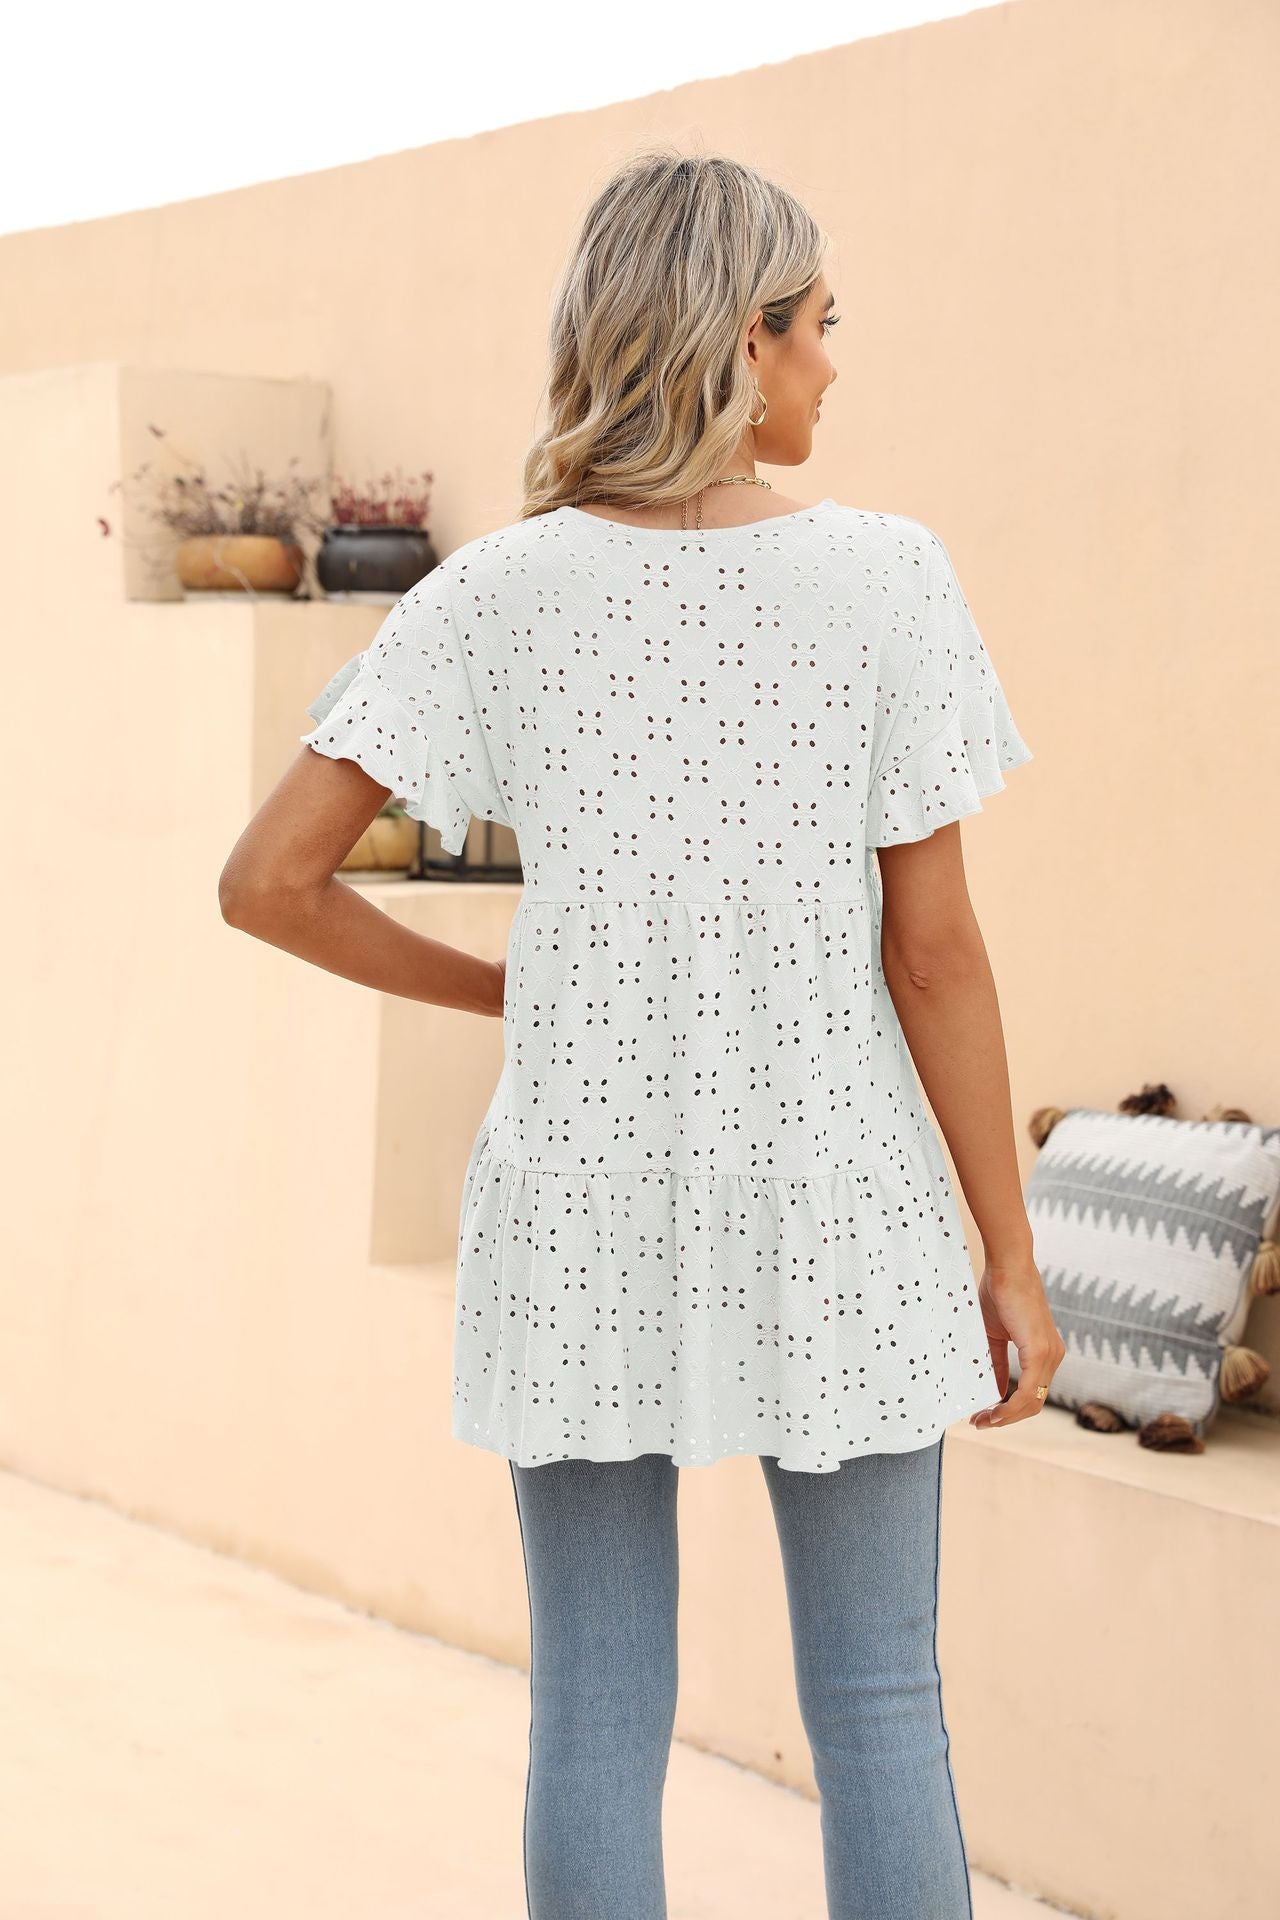 Openwork Round Neck Flounce Sleeve Blouse - Women’s Clothing & Accessories - Shirts & Tops - 6 - 2024